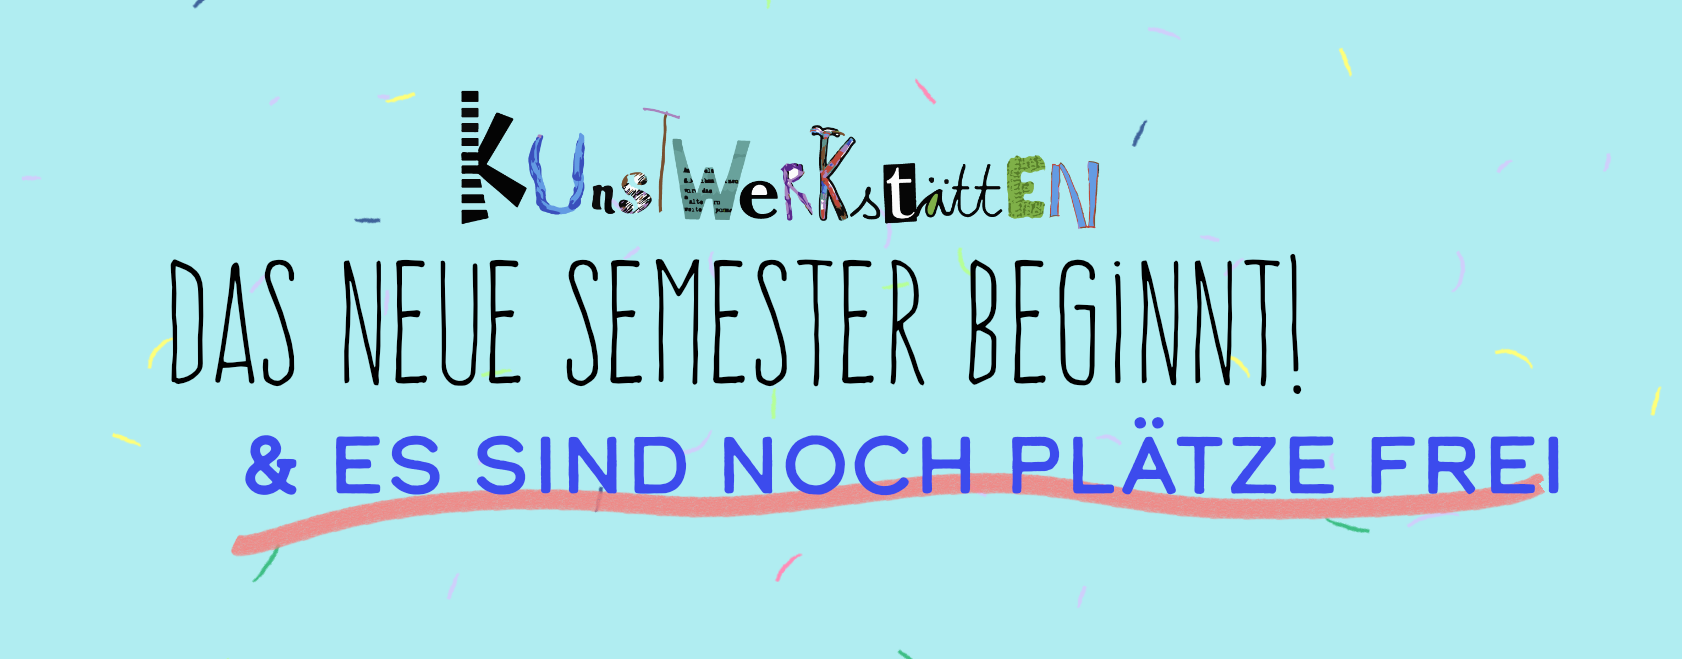 neuessemester.png